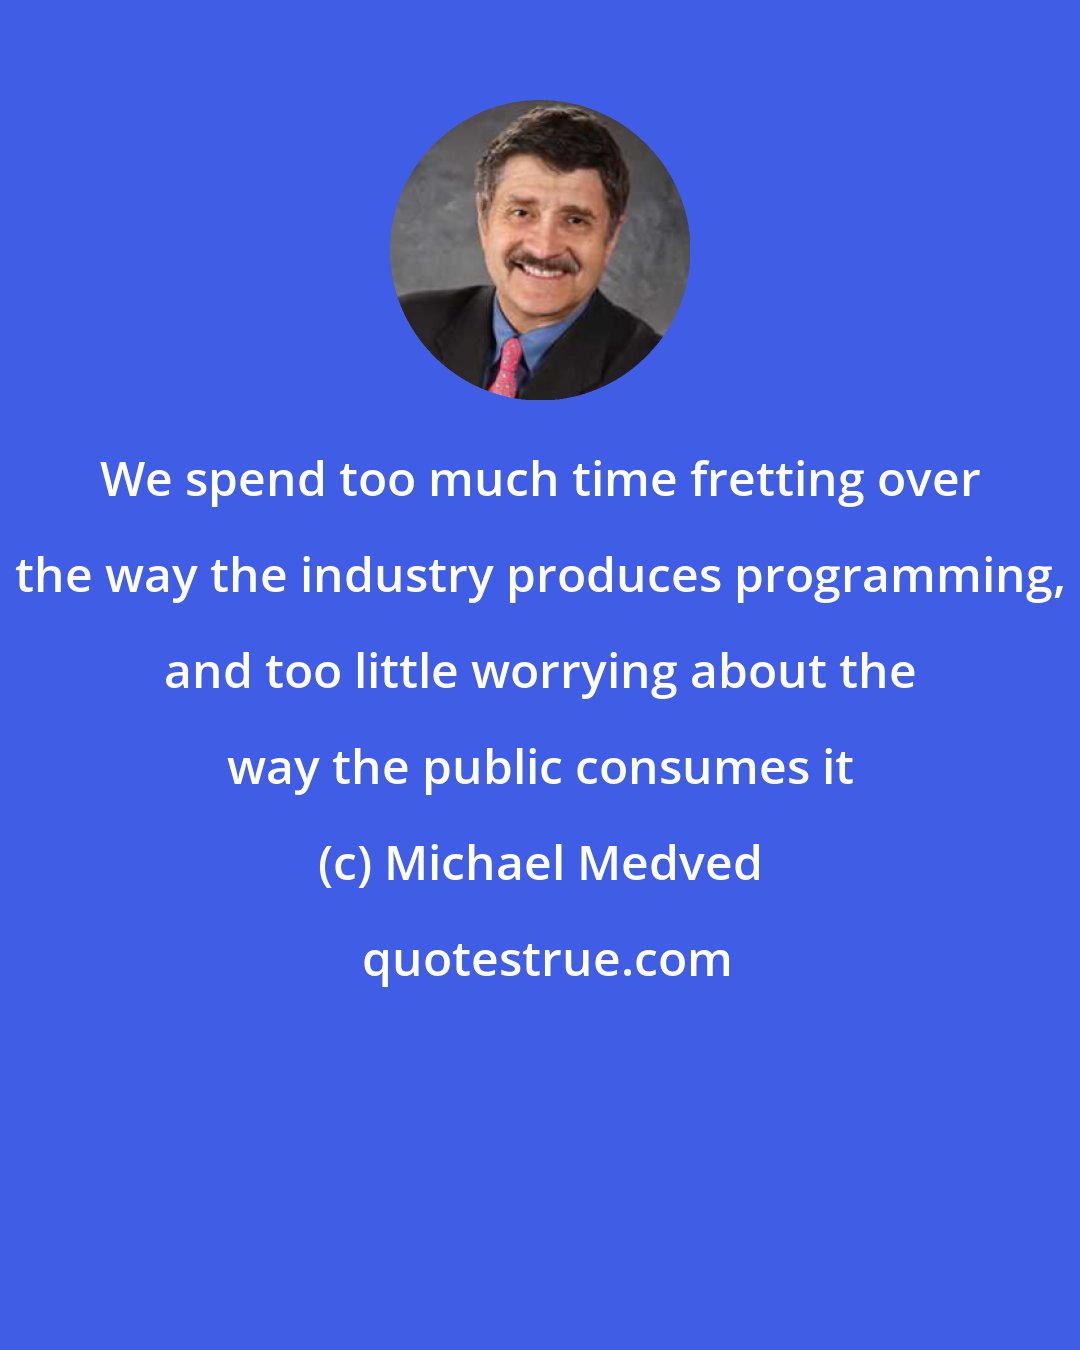 Michael Medved: We spend too much time fretting over the way the industry produces programming, and too little worrying about the way the public consumes it